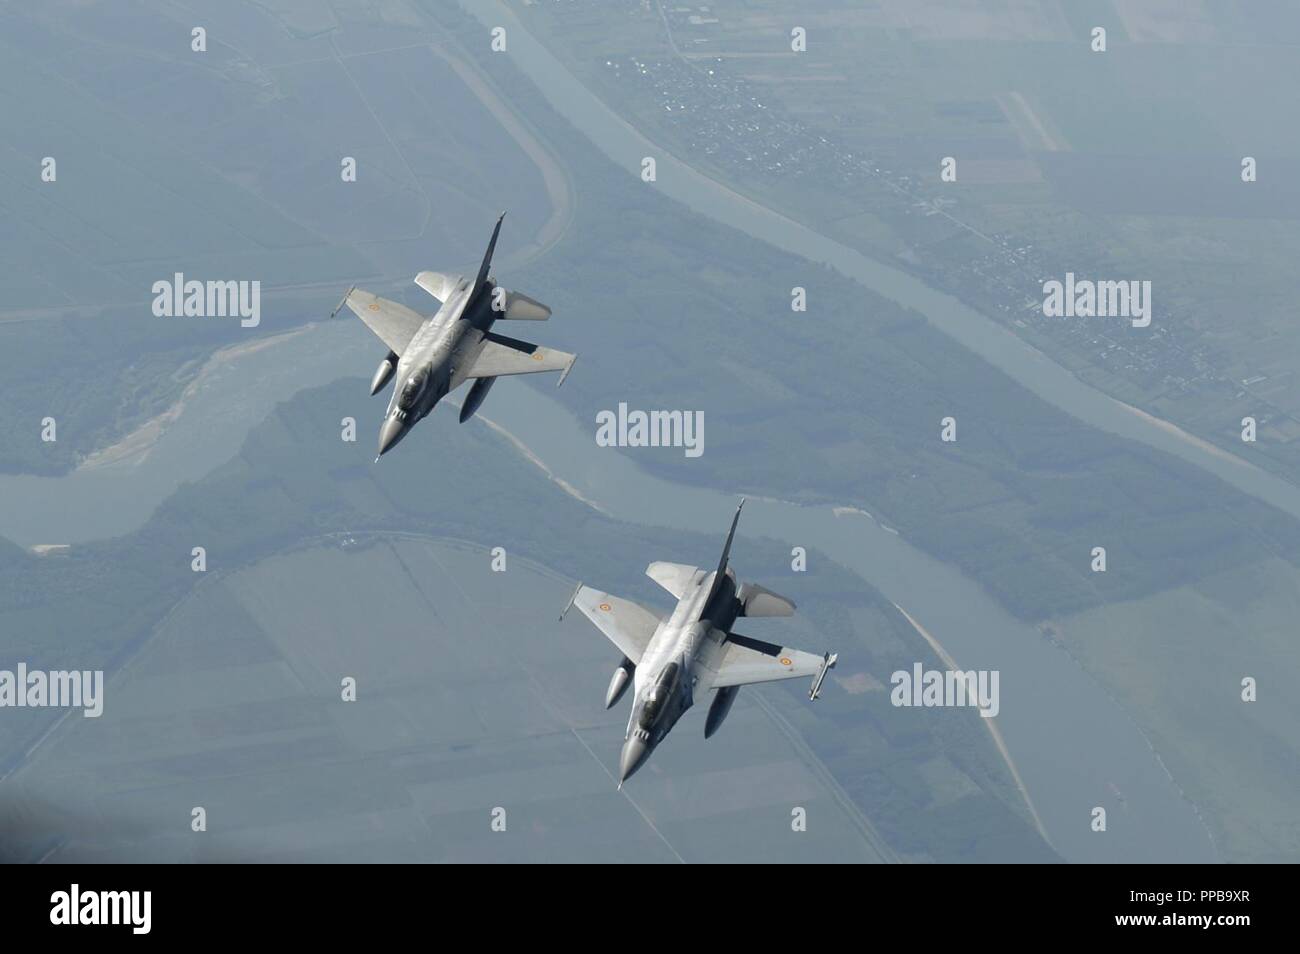 Two Romanian F-16 Fighting Falcons fly below a U.S. Air Force KC-135R Stratotanker assigned to the 100th Air Refueling Wing, Royal Air Force Mildenhall, England, above Bucharest, Romania, Aug. 20, 2018. The U.S. works closely with Romania on a range of global challenges, including promoting international peace, security and economic prosperity. Stock Photo